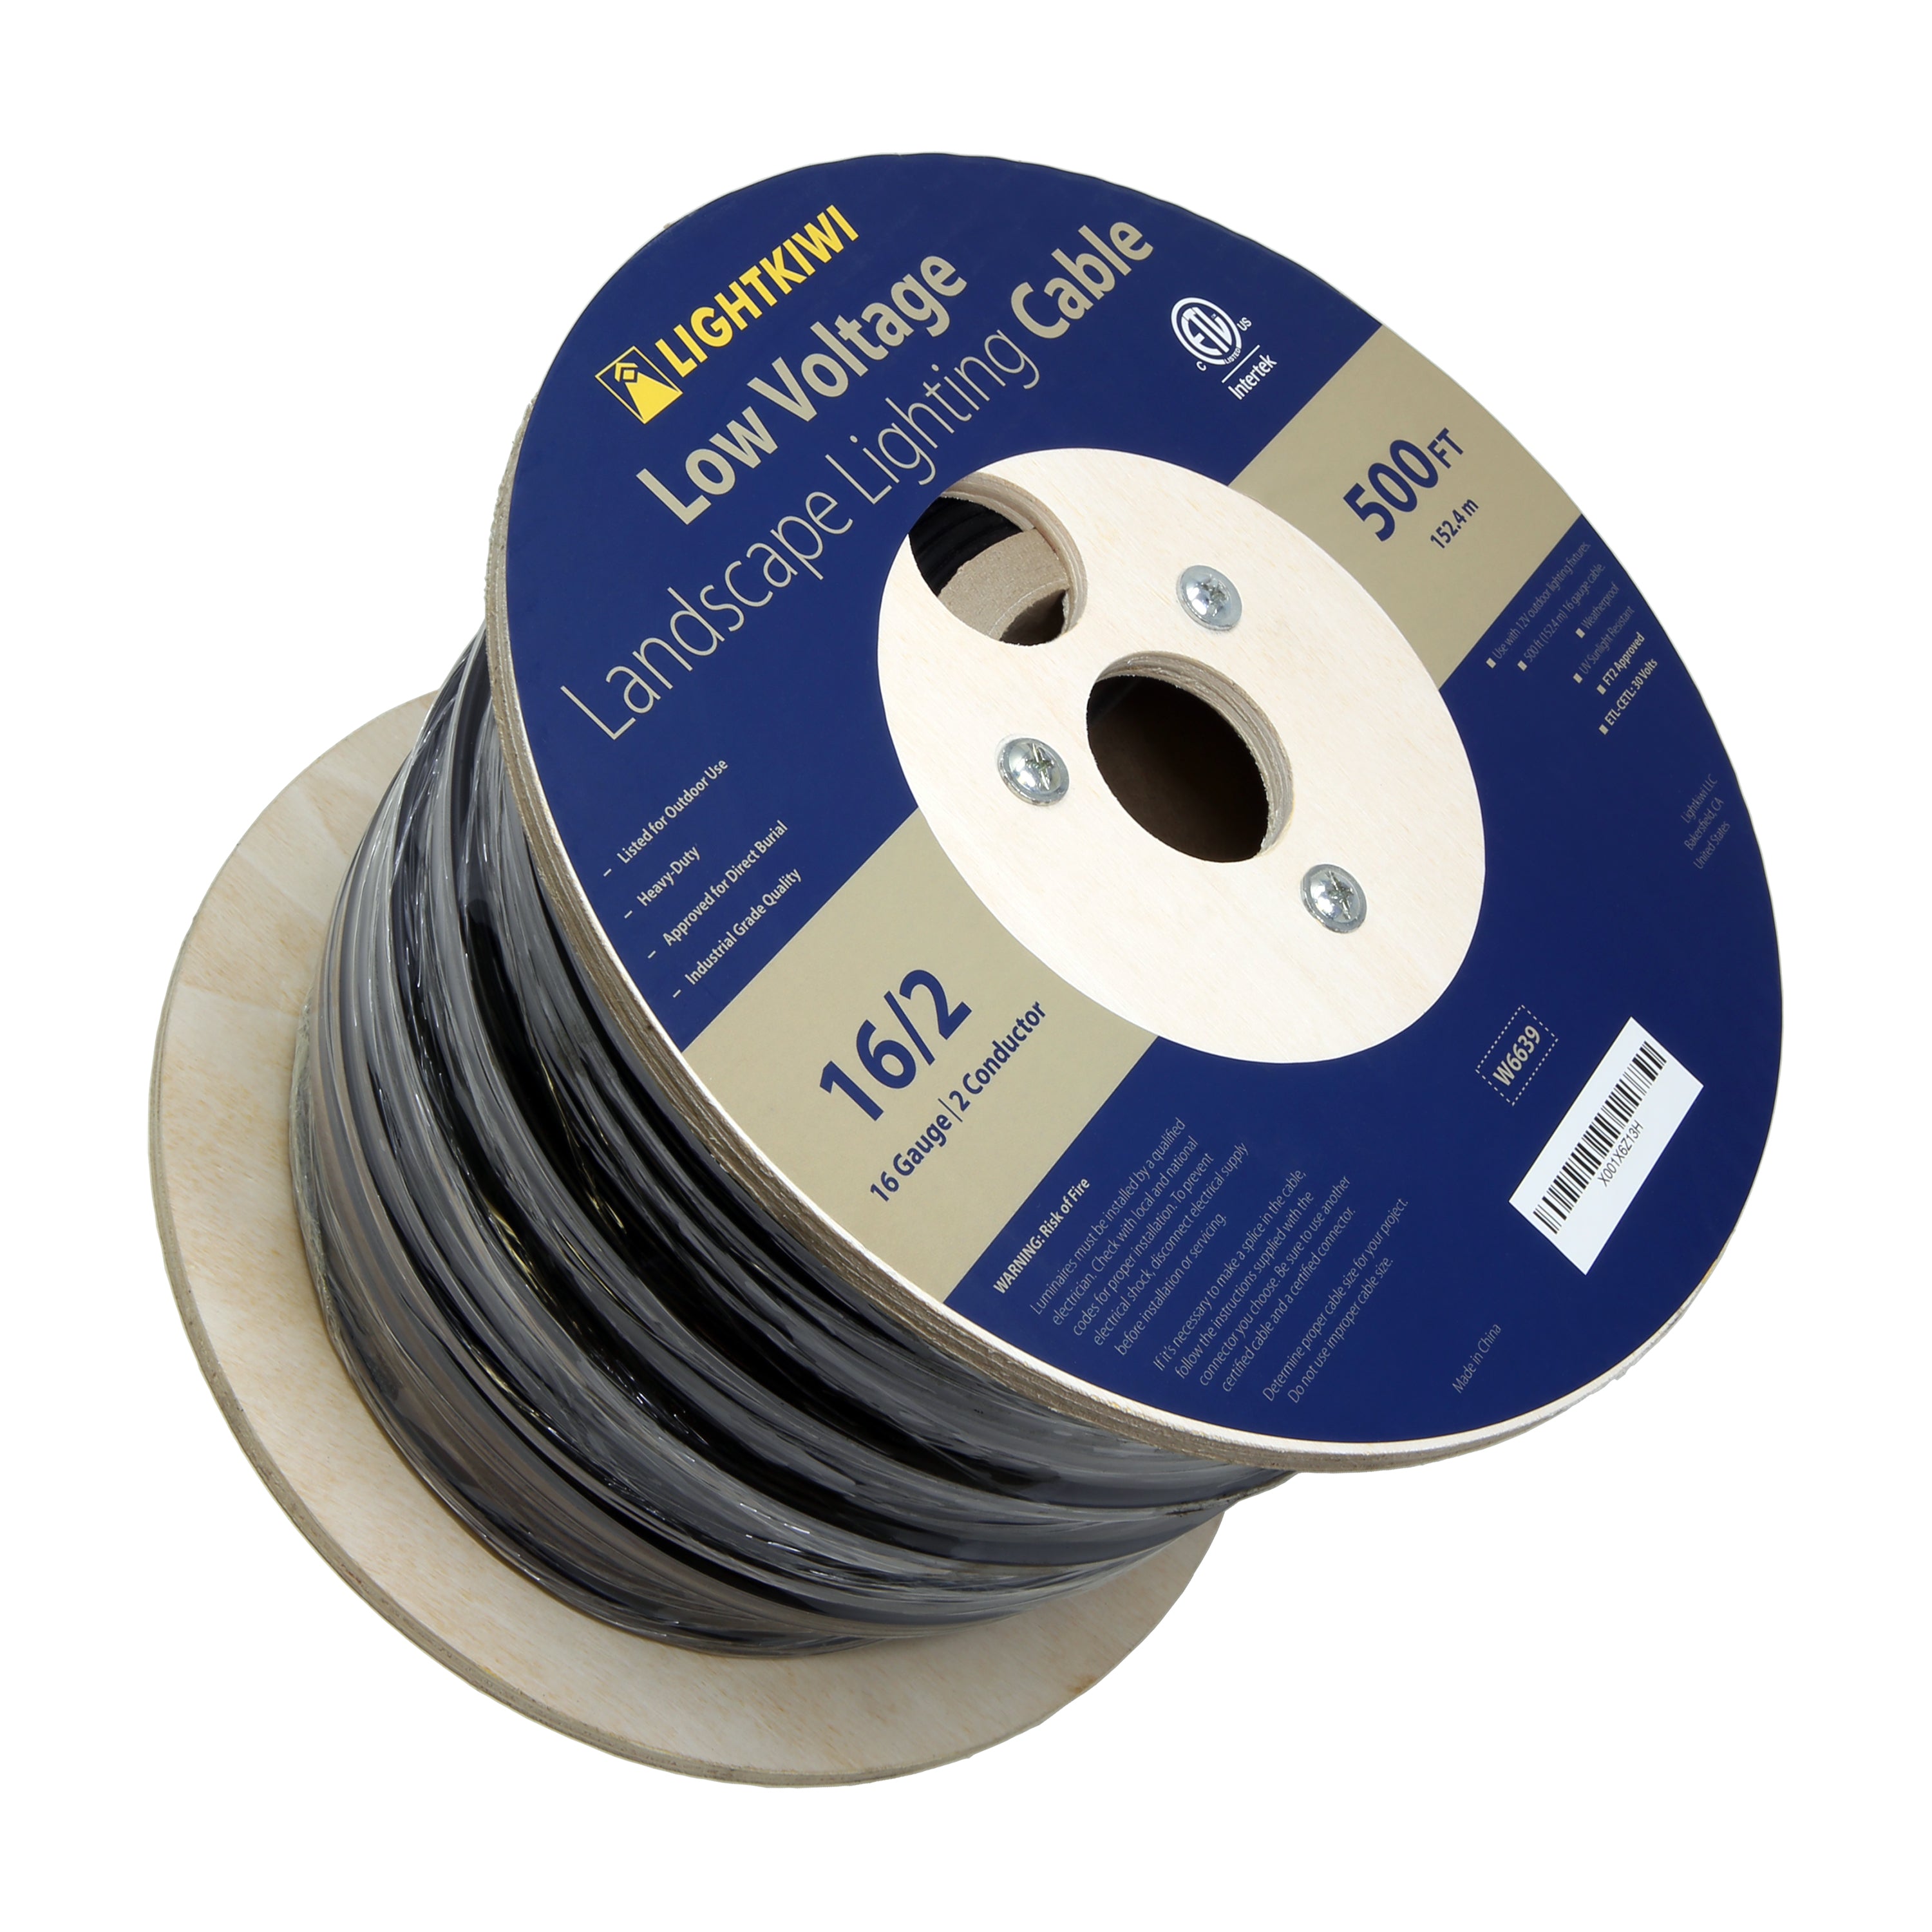 16AWG 2-Conductor Direct Burial Wire for Low Voltage Landscape Lighting, 500ft